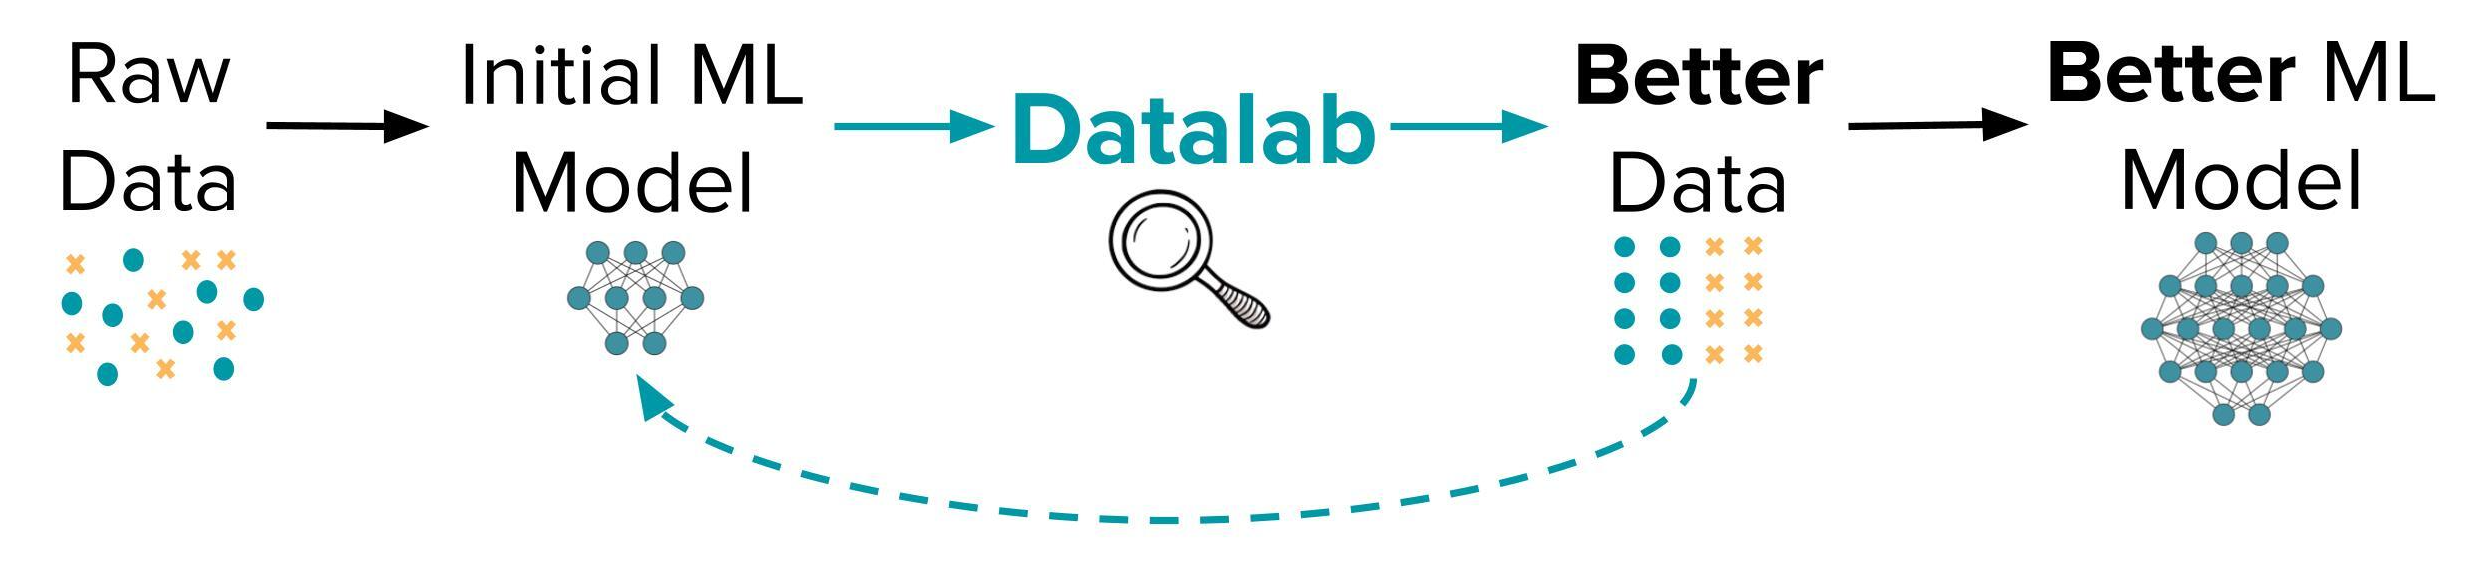 Overview of data/model improvement with Datalab